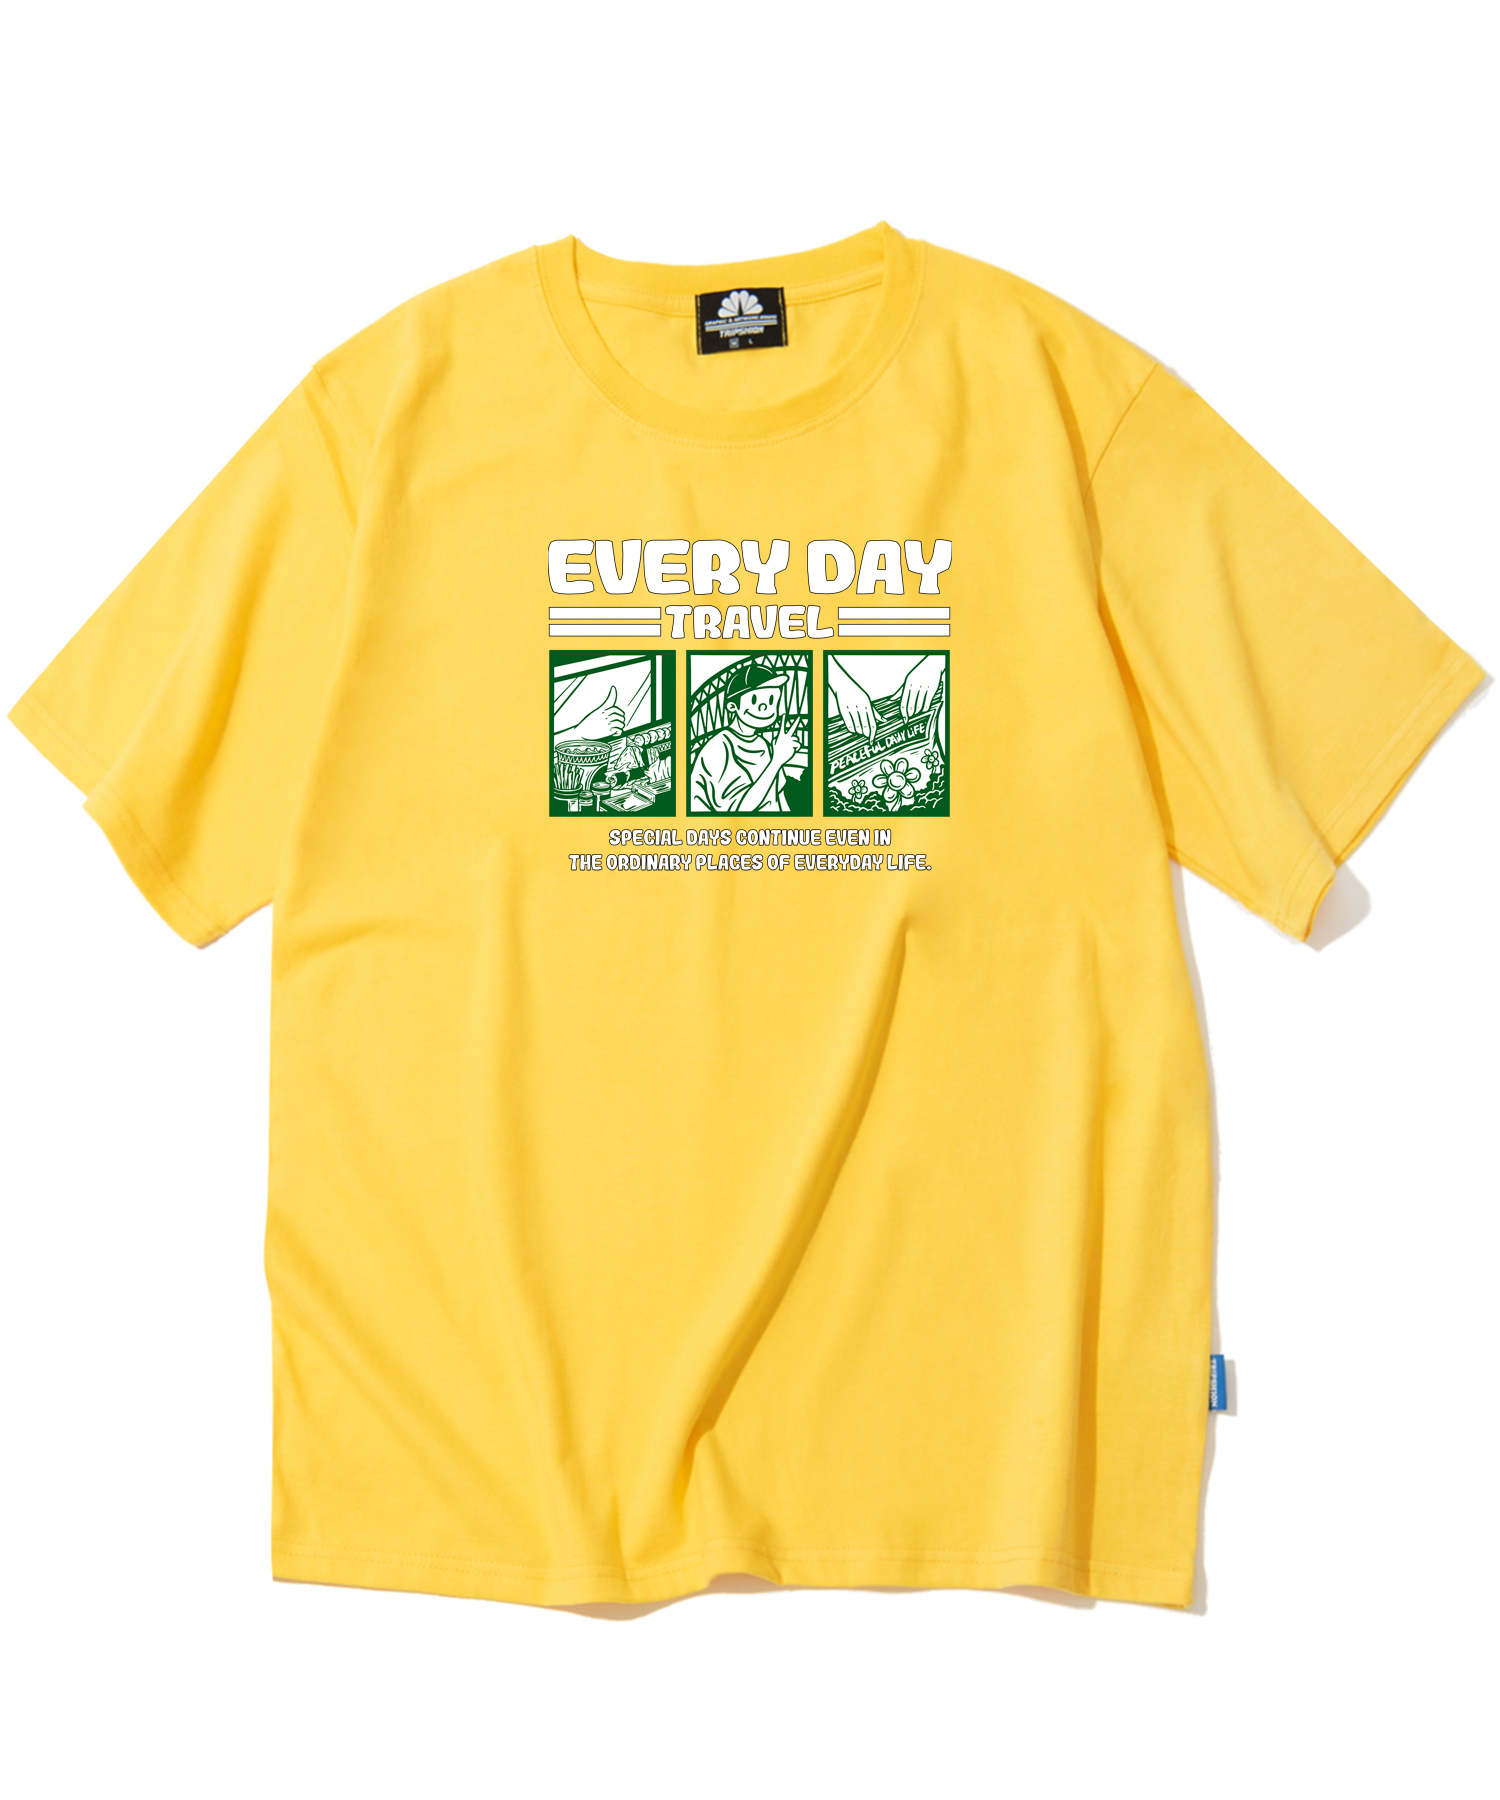 EVERYDAY CARTTON GRAPHIC T-SHIRTS - YELLOW